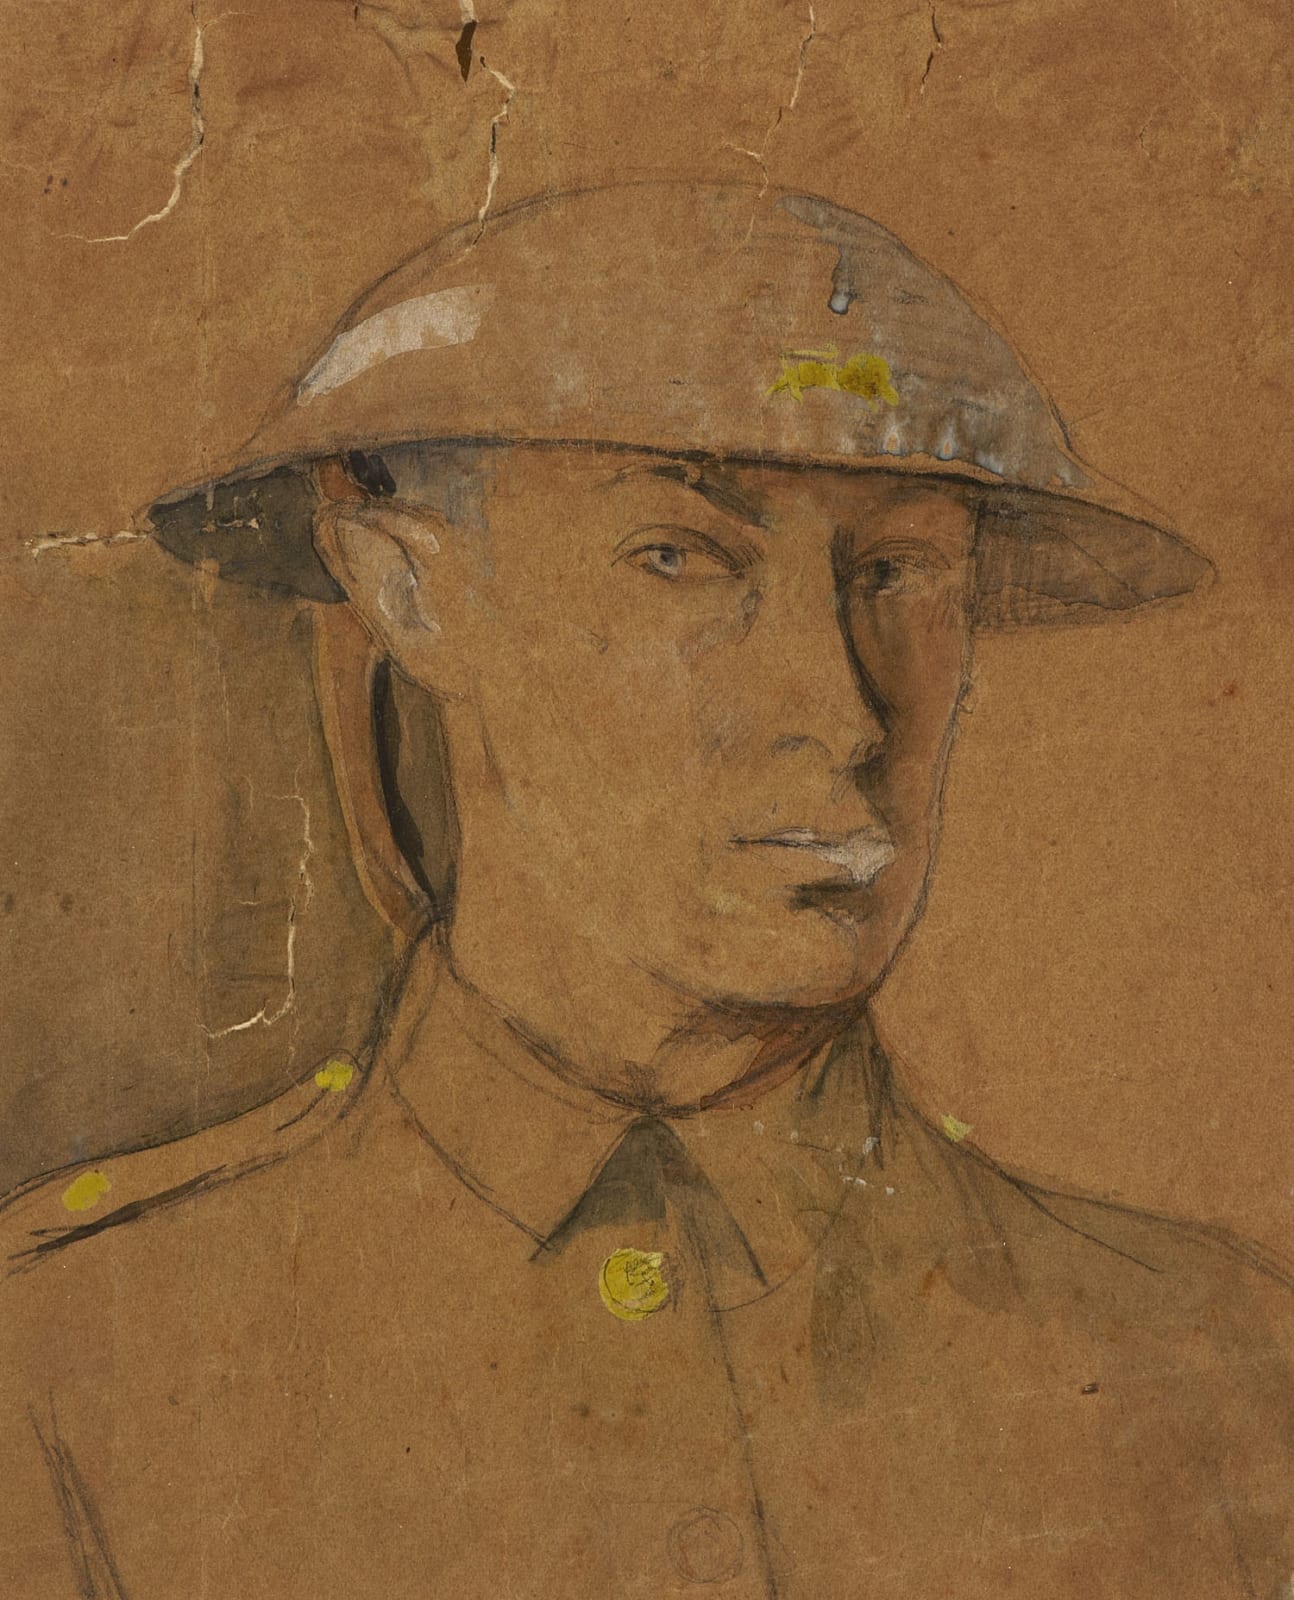 Isaac Rosenberg (1890-1918) Self Portrait in Steel Helmet 1916 Black chalk, gouache and wash on paper 22.4 x 19.6 cm Ben Uri Collection Acquired in 2009 with the assistance of Art Fund, the MLA/V&A Purchase Grant Fund and anonymous donors